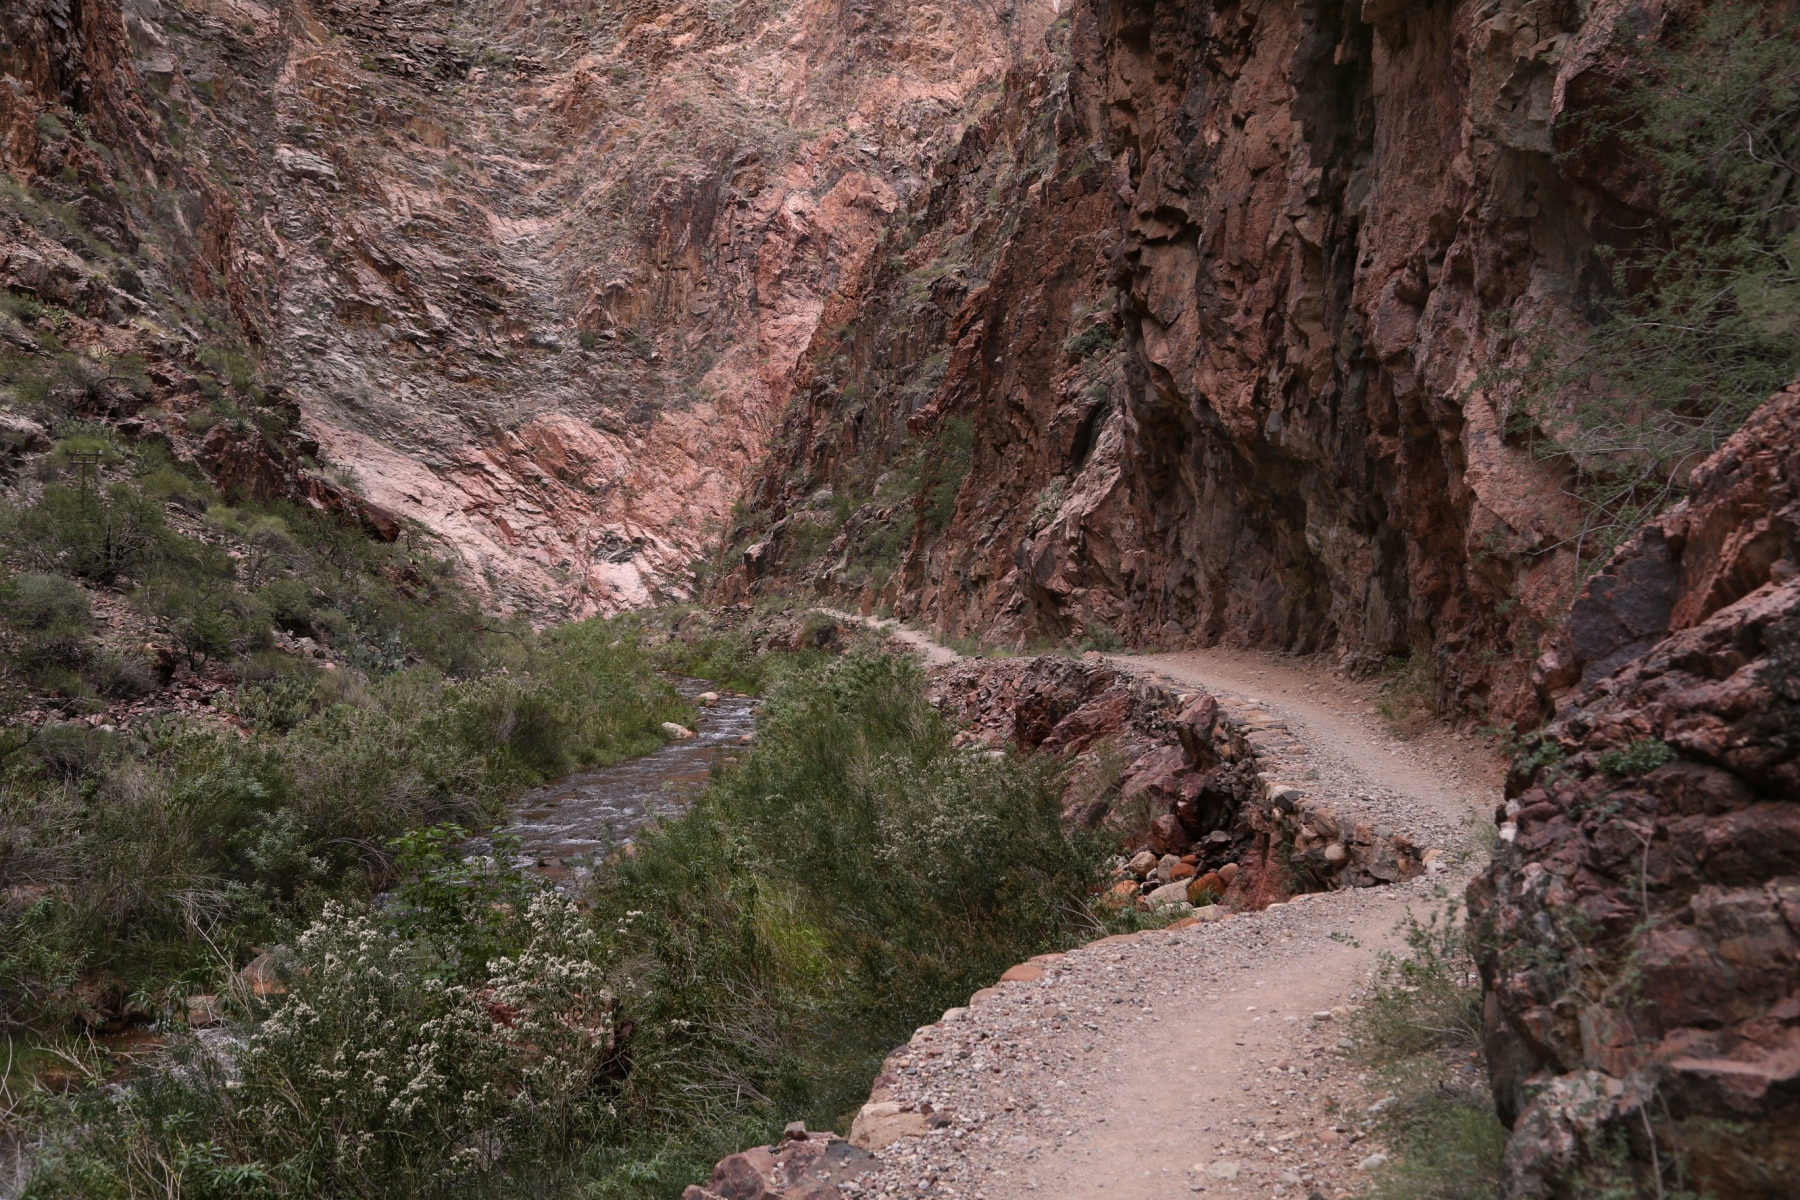 A rocky trail runs alongside steep, dark cliffs with a creek running alongside in The Box section of North Kaibab Trail in Grand Canyon National Park.